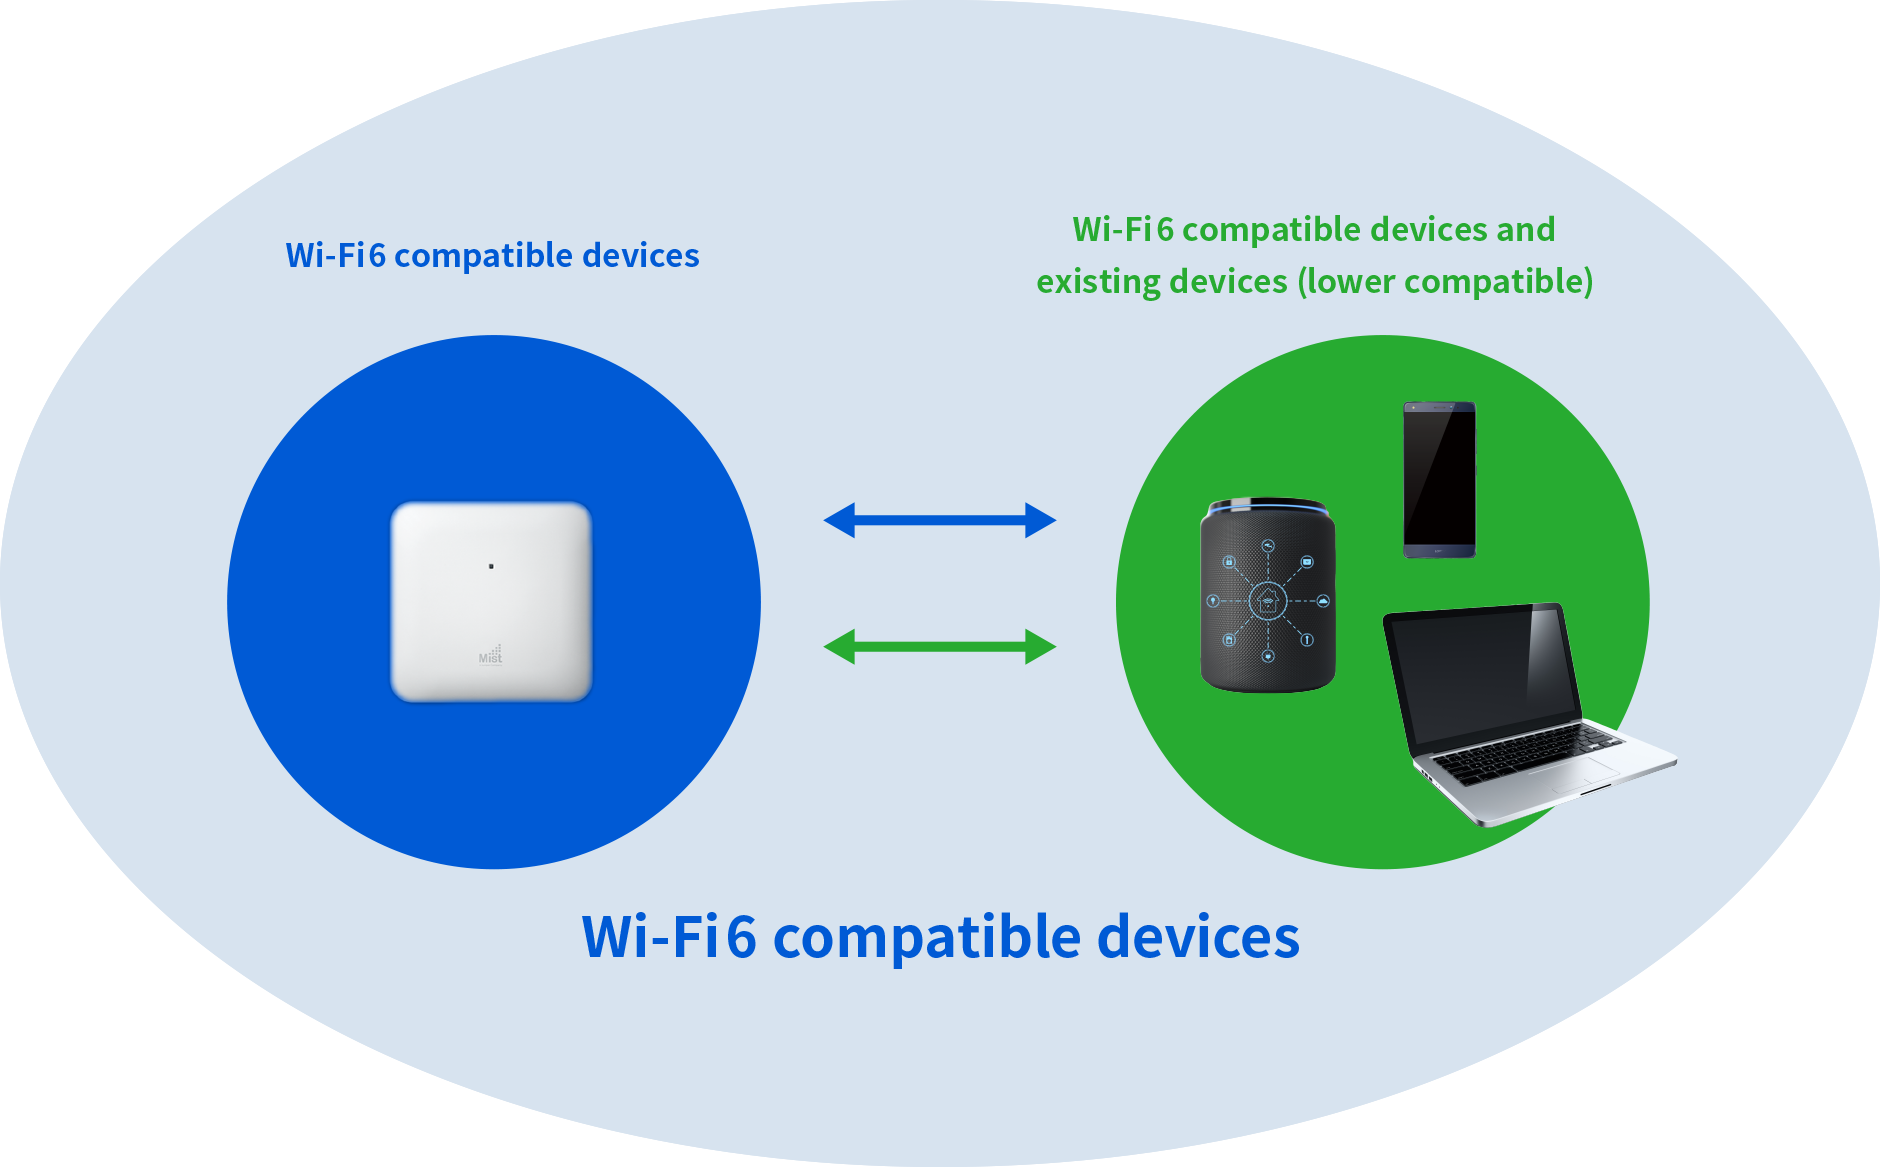 Wi-Fi6-compatible devices will be the future mainstream